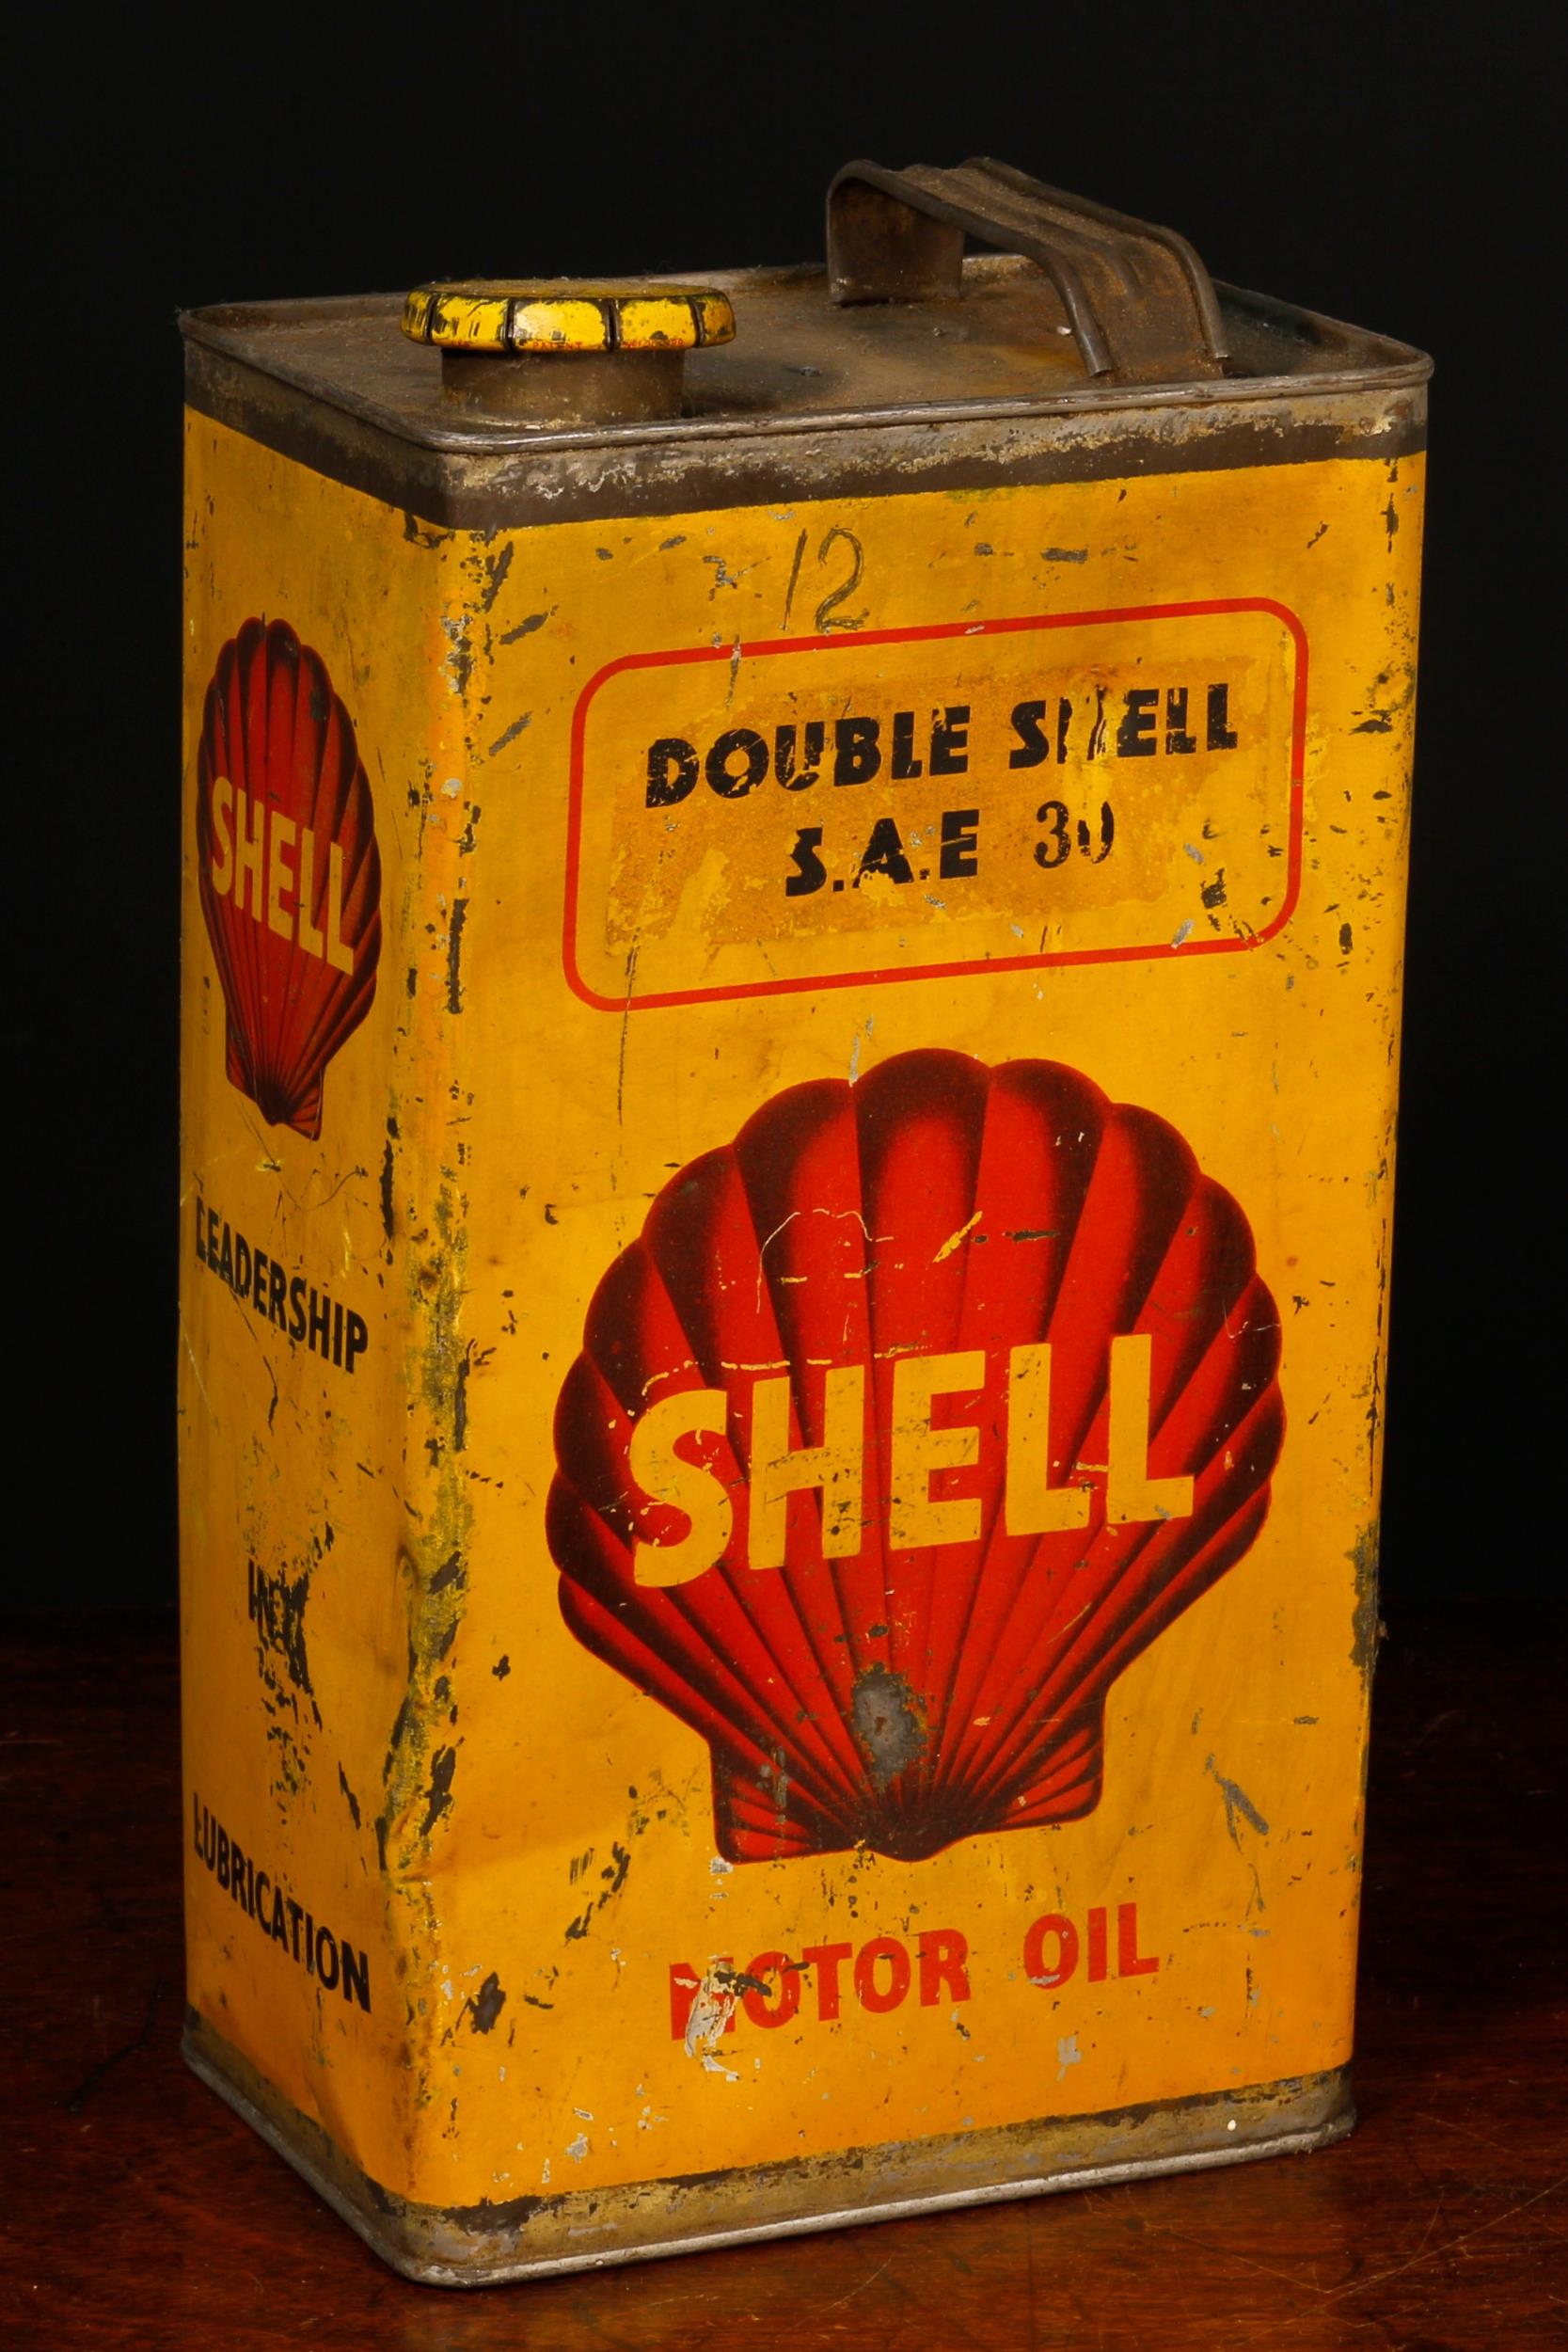 Motoring Interest - a 1930's/1940's rounded rectangular shaped Shell Motor Oil can, 'DOUBLE SHELL,